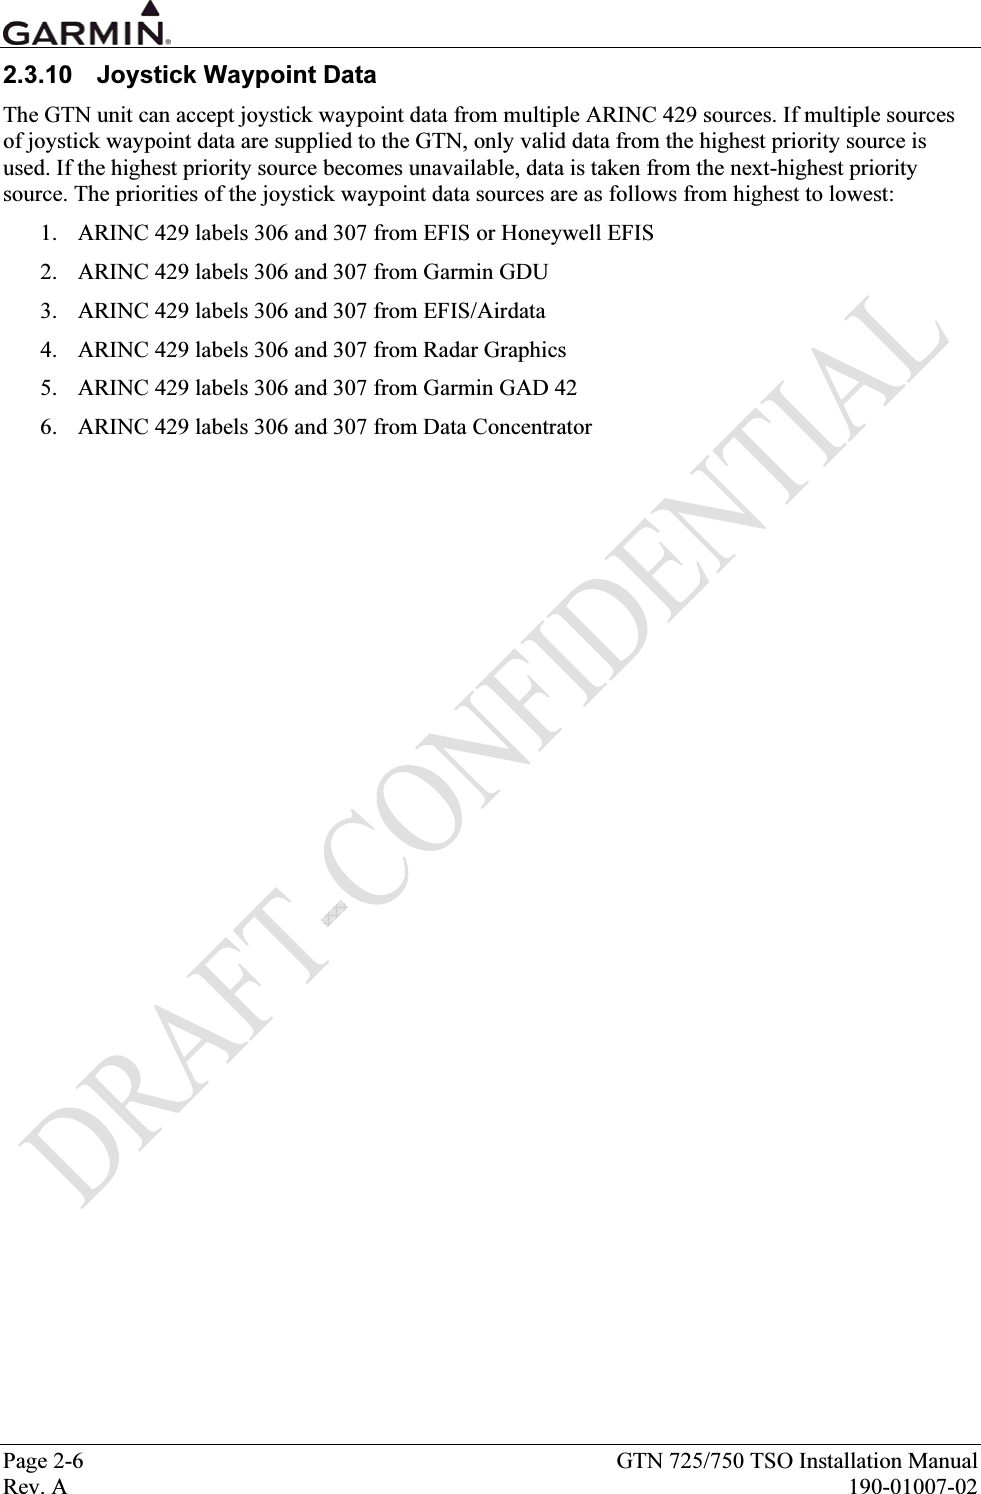  Page 2-6  GTN 725/750 TSO Installation Manual Rev. A  190-01007-02 2.3.10 Joystick Waypoint Data The GTN unit can accept joystick waypoint data from multiple ARINC 429 sources. If multiple sources of joystick waypoint data are supplied to the GTN, only valid data from the highest priority source is used. If the highest priority source becomes unavailable, data is taken from the next-highest priority source. The priorities of the joystick waypoint data sources are as follows from highest to lowest: 1. ARINC 429 labels 306 and 307 from EFIS or Honeywell EFIS 2. ARINC 429 labels 306 and 307 from Garmin GDU 3. ARINC 429 labels 306 and 307 from EFIS/Airdata 4. ARINC 429 labels 306 and 307 from Radar Graphics 5. ARINC 429 labels 306 and 307 from Garmin GAD 42 6. ARINC 429 labels 306 and 307 from Data Concentrator 